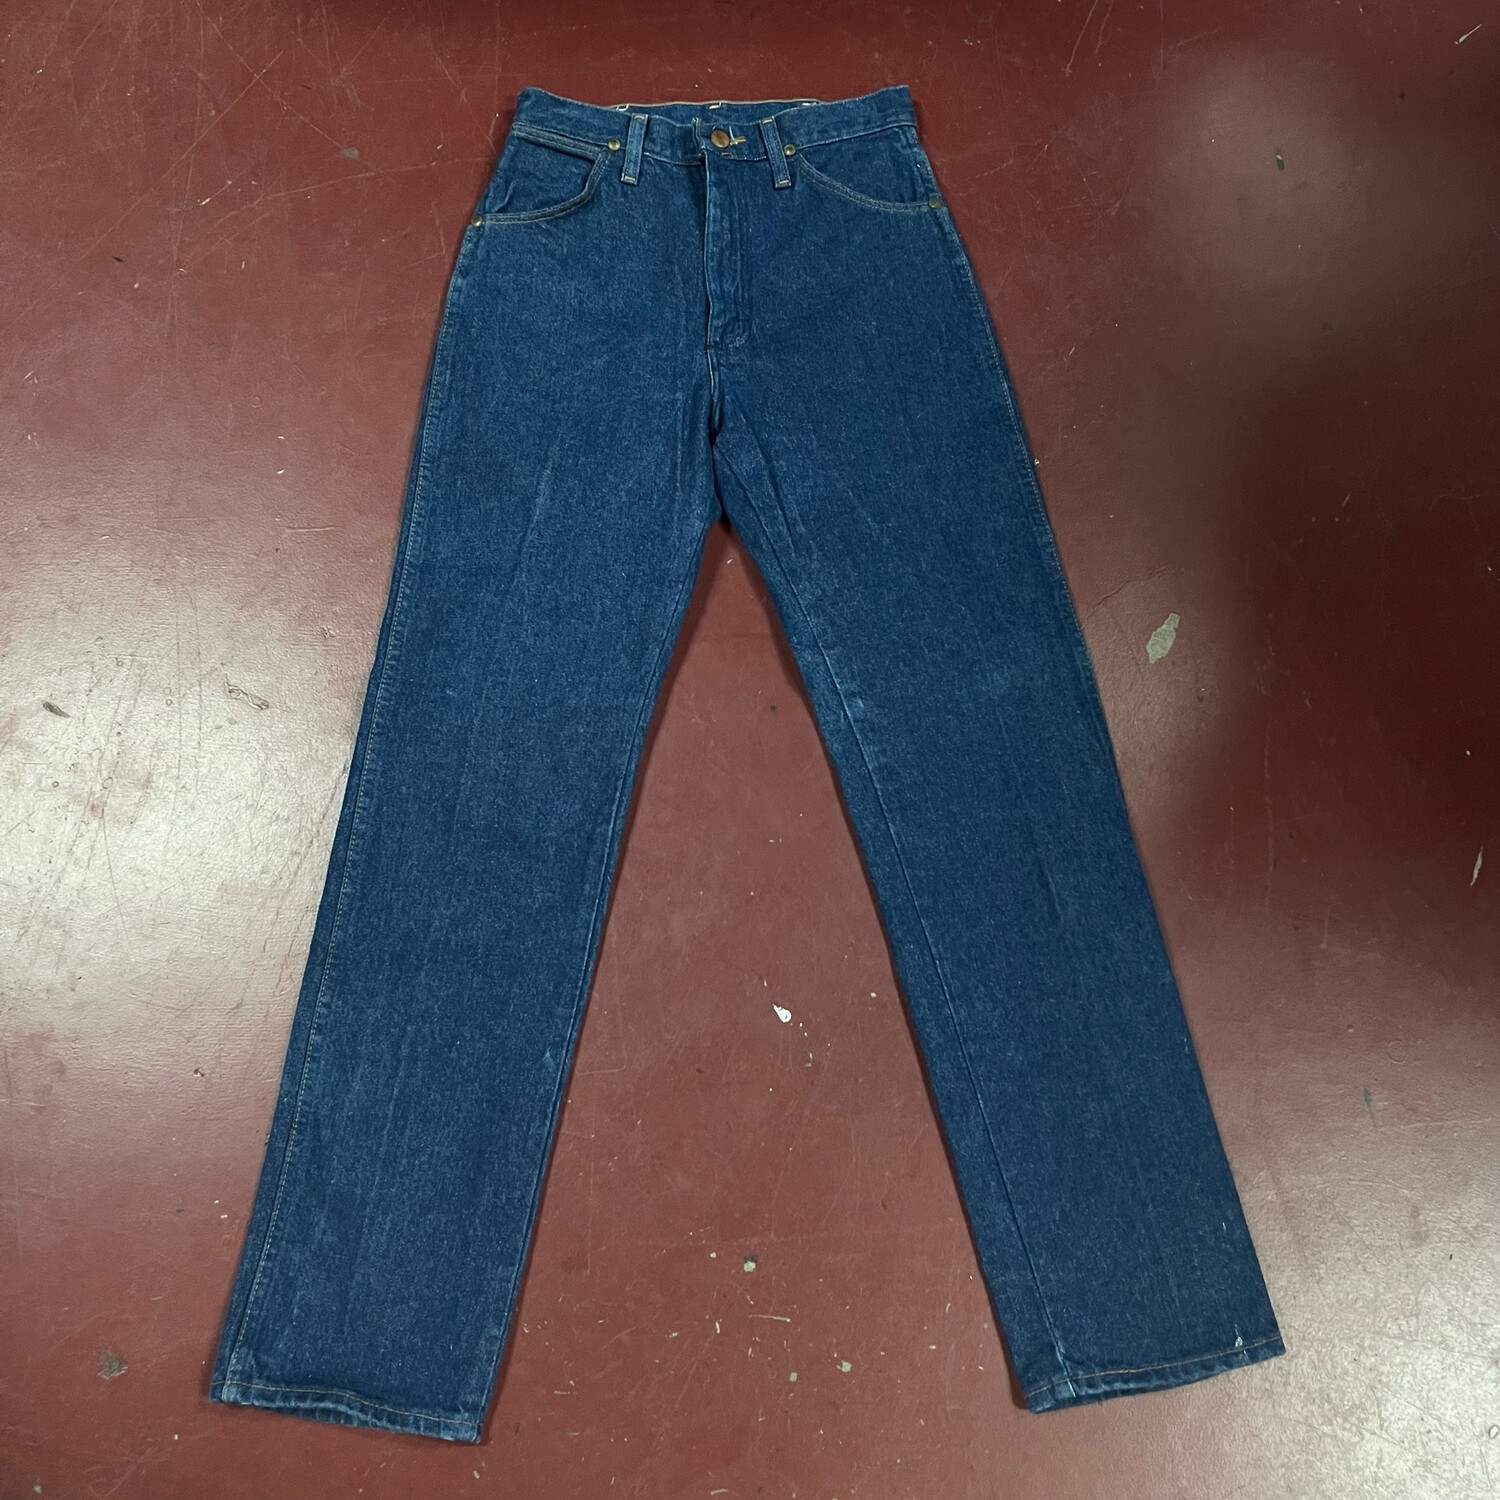 Vintage 1980s Wrangler High Waisted Cowboy Jeans. Free Shipping